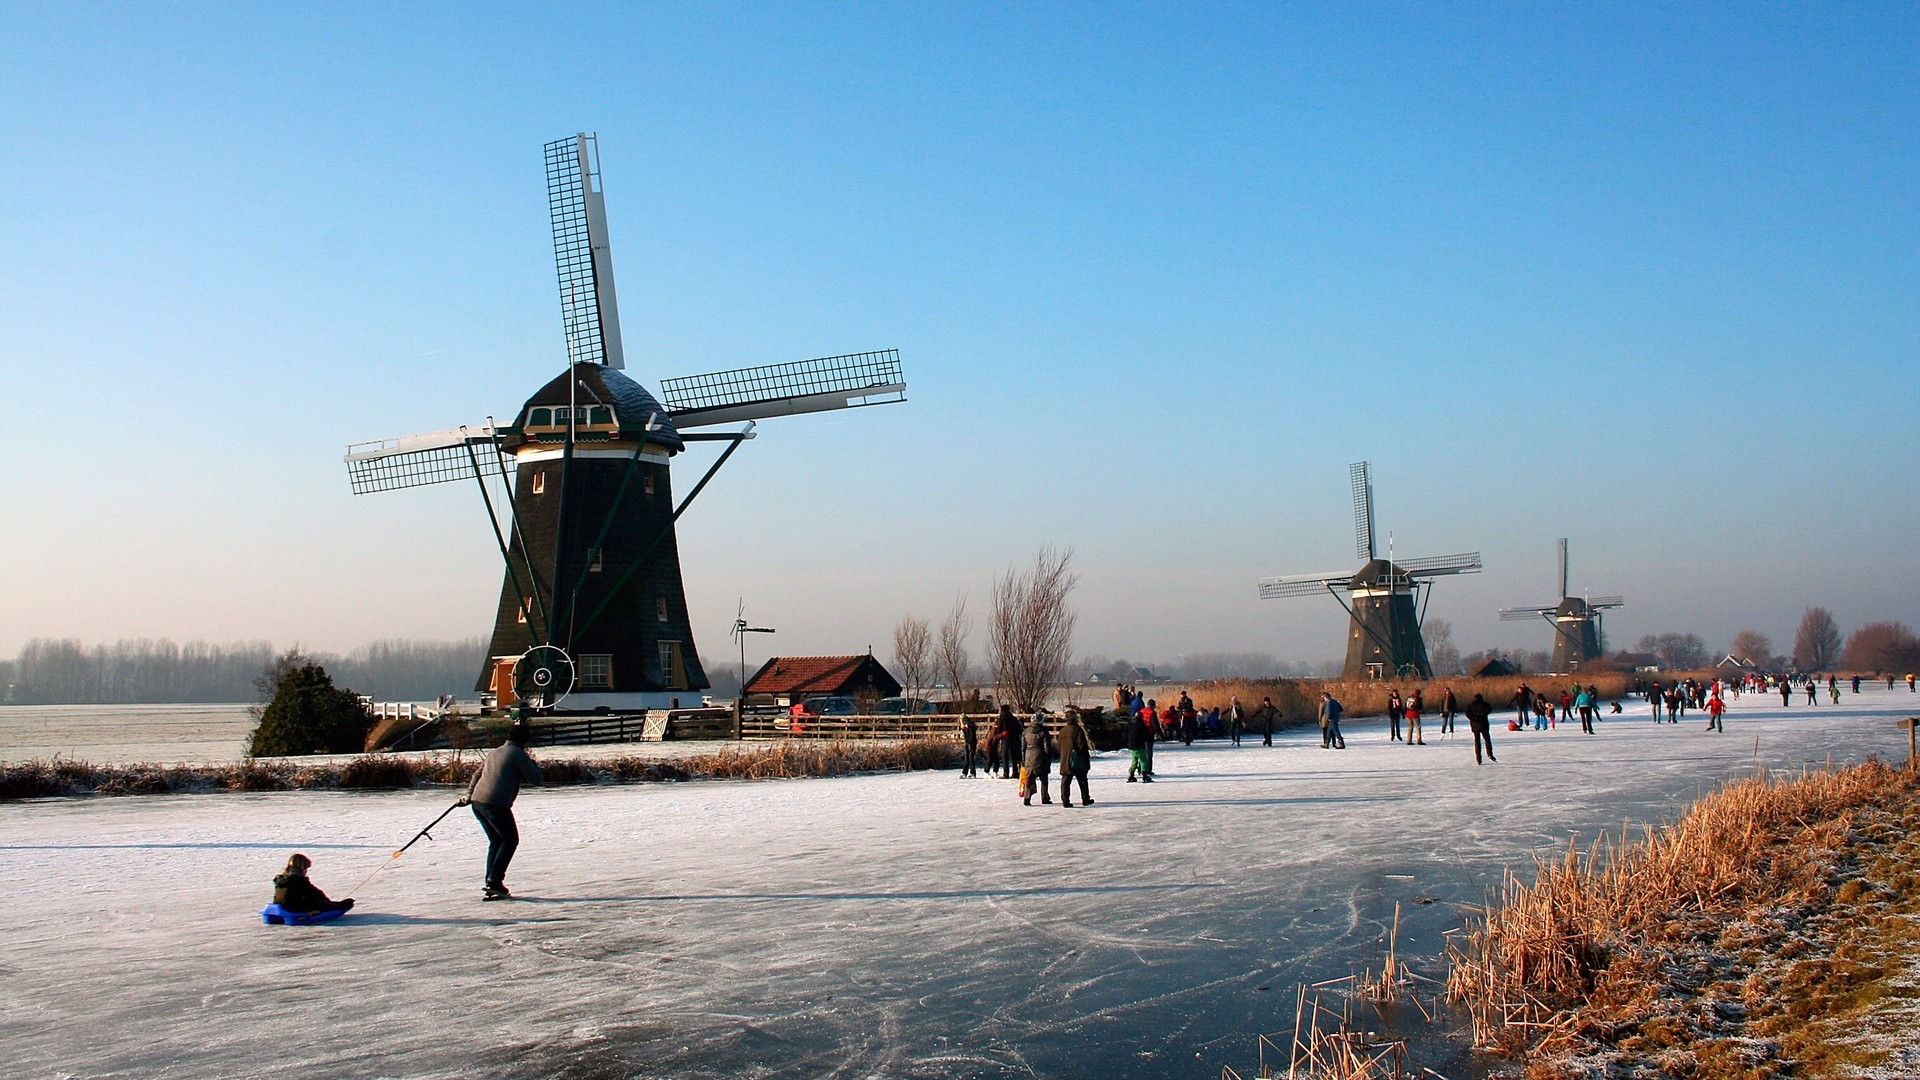 General 1920x1080 windmill Netherlands people winter ice cold frost outdoors